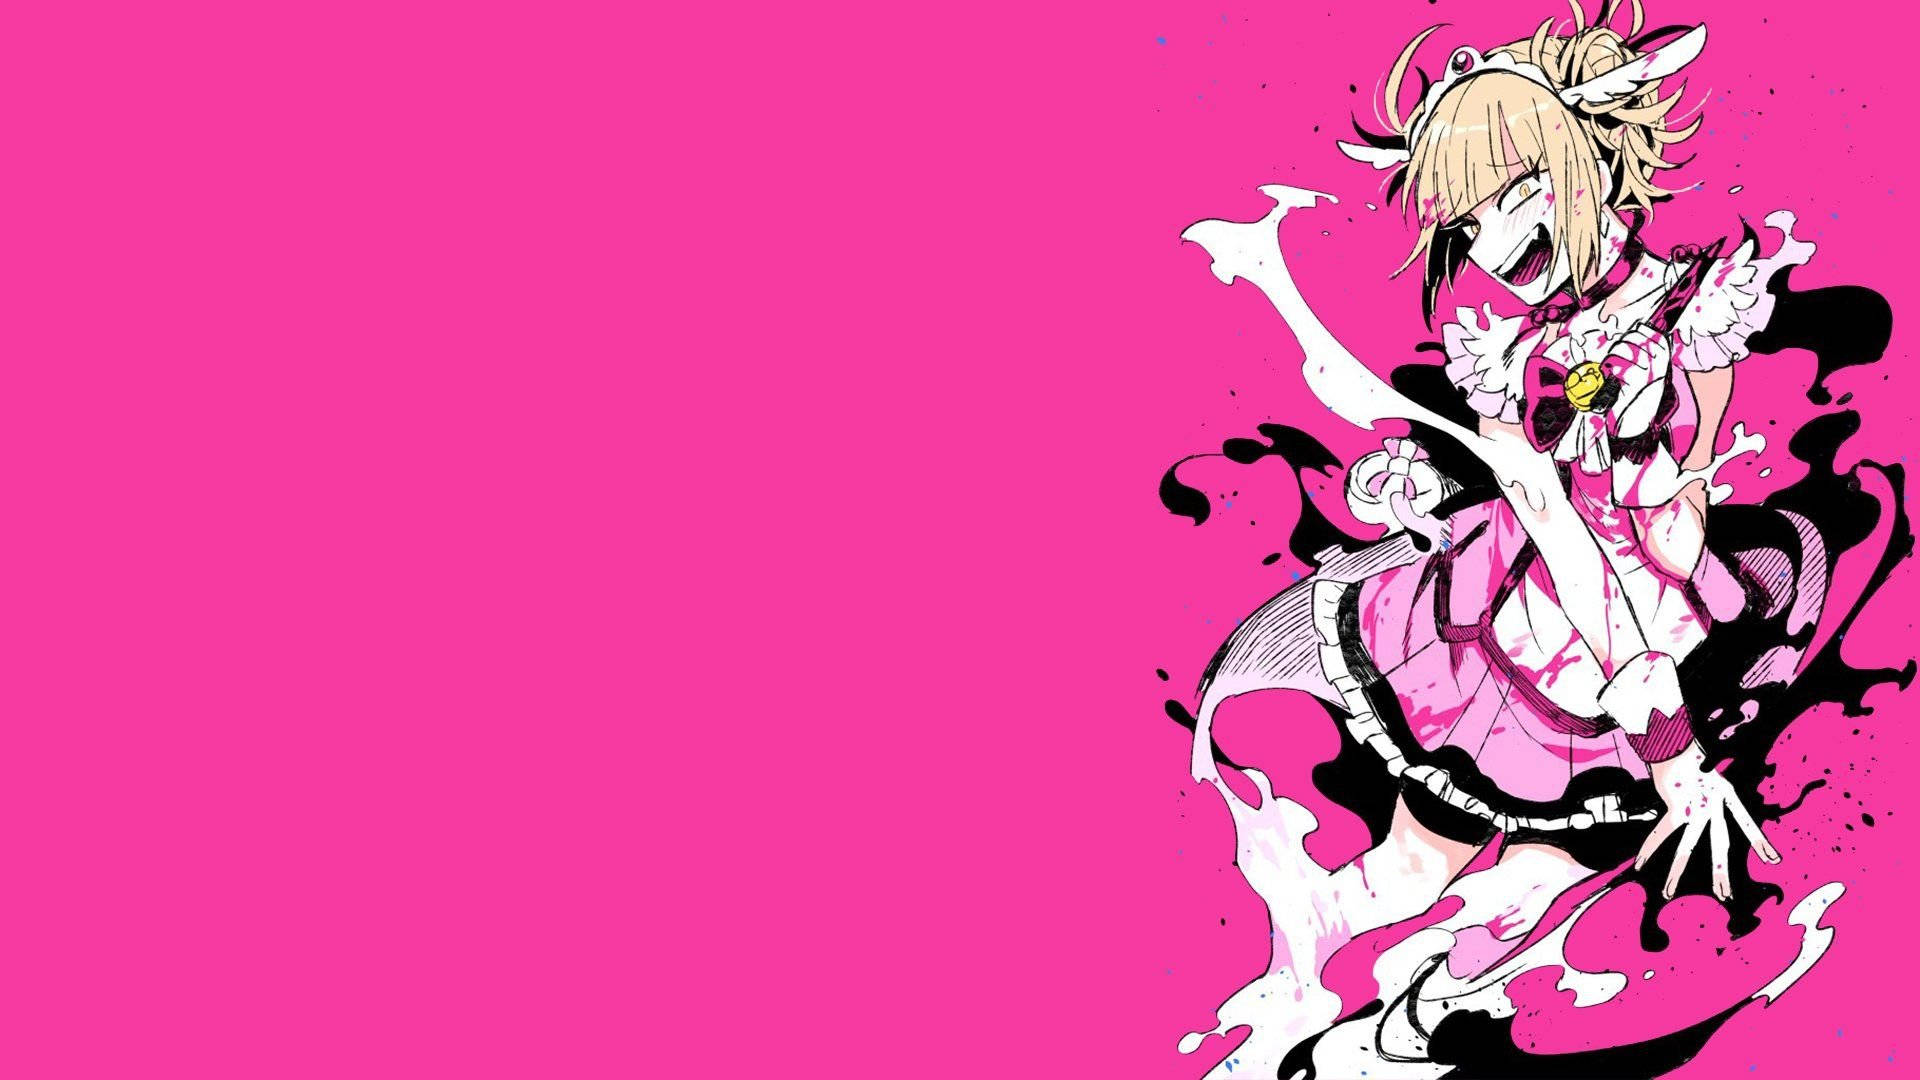 Himiko Toga In Pink Dress Background